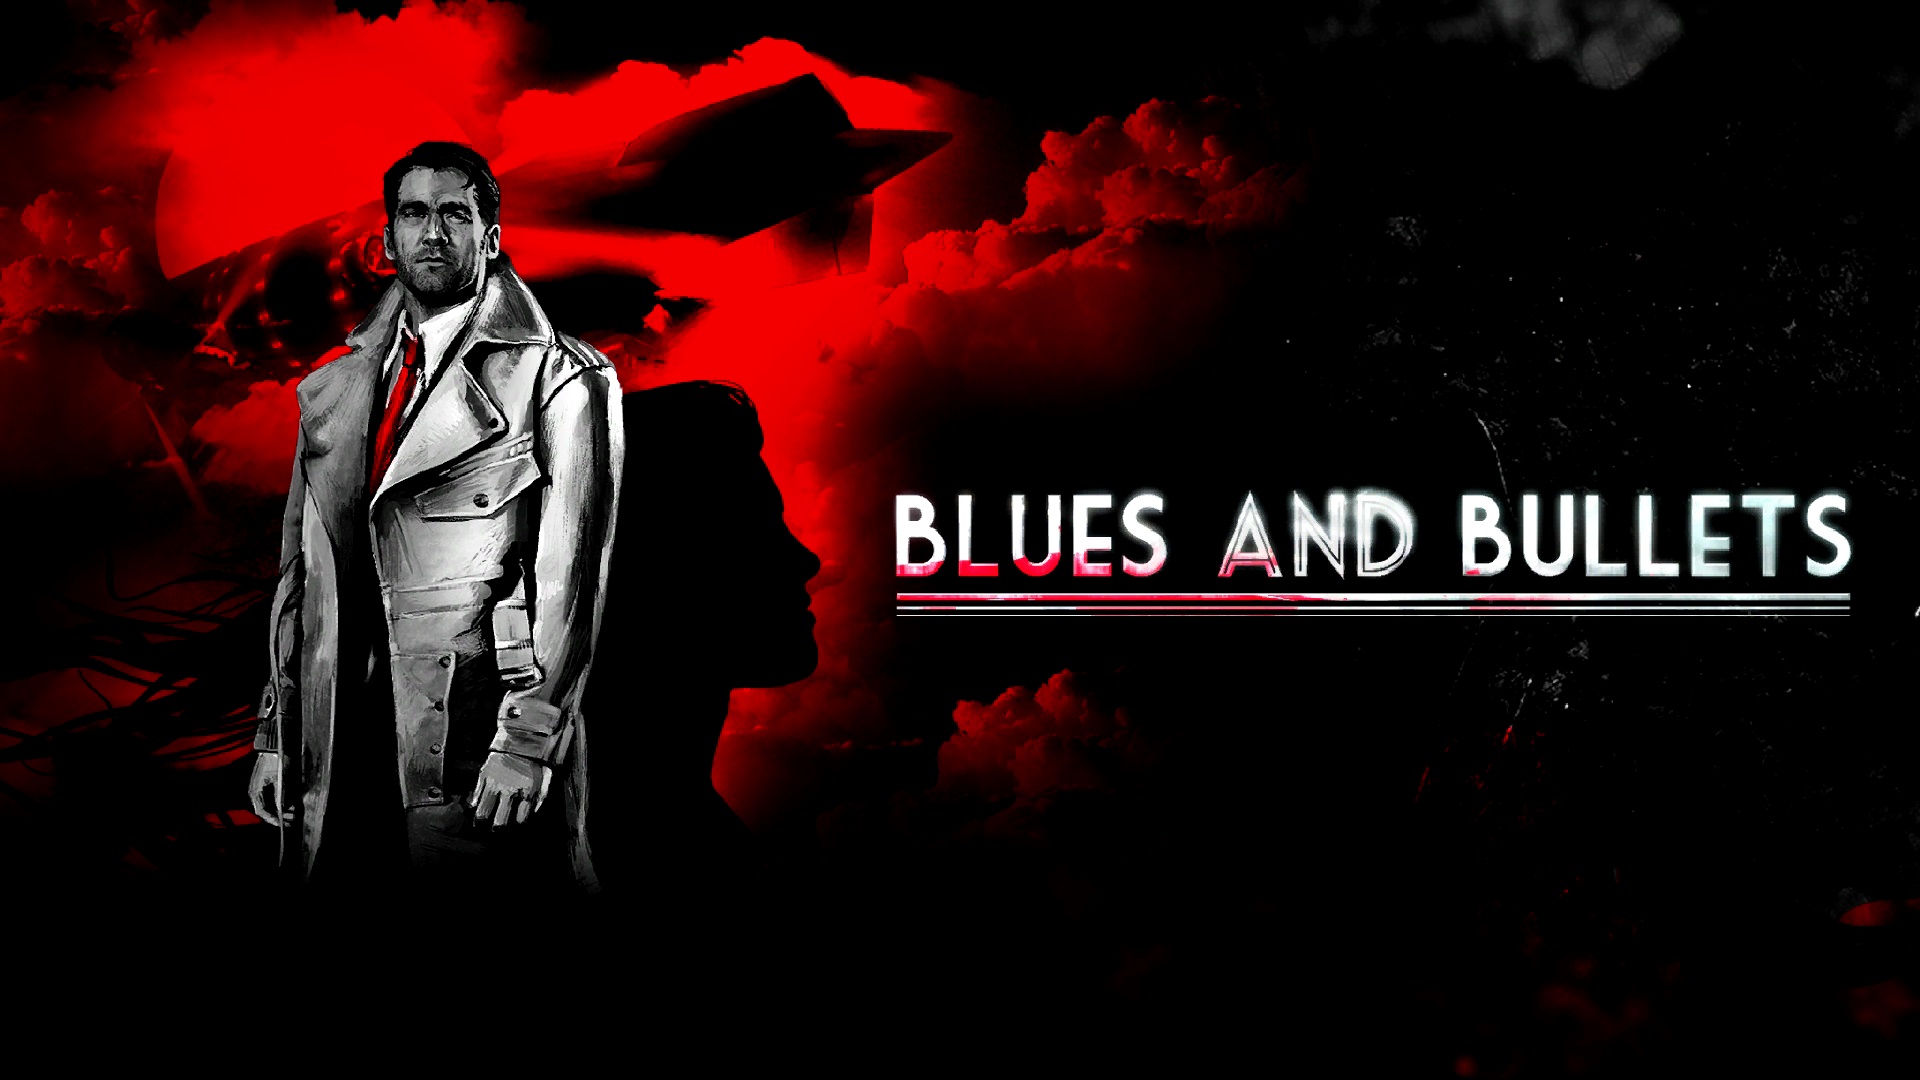 Blues And Bullets HD wallpapers, Desktop wallpaper - most viewed